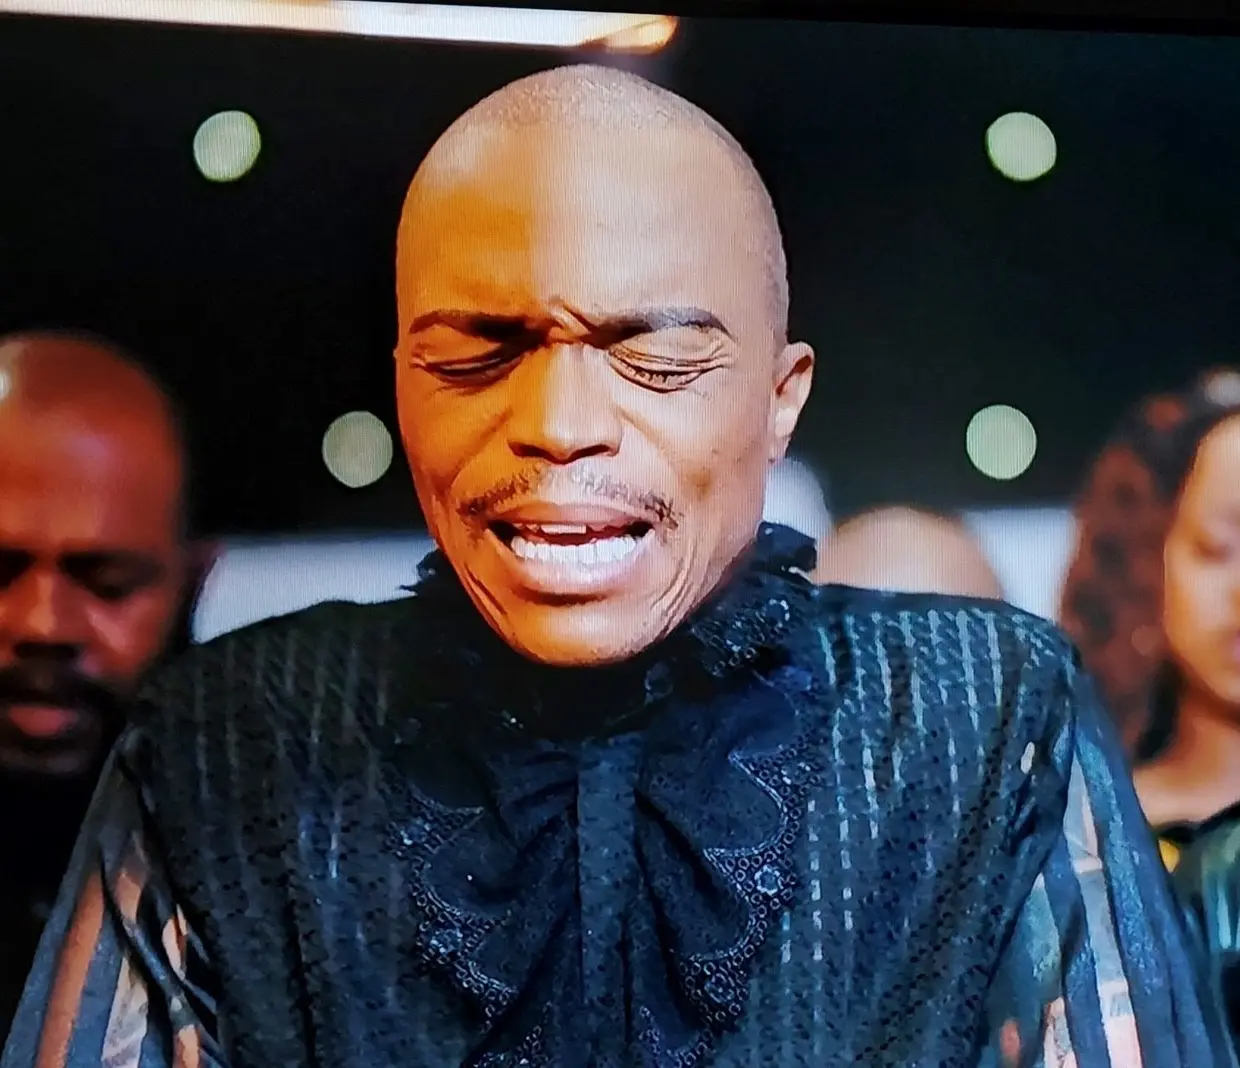 Drama as Somizi demands his money back after spending R30 000 on a night out with friends